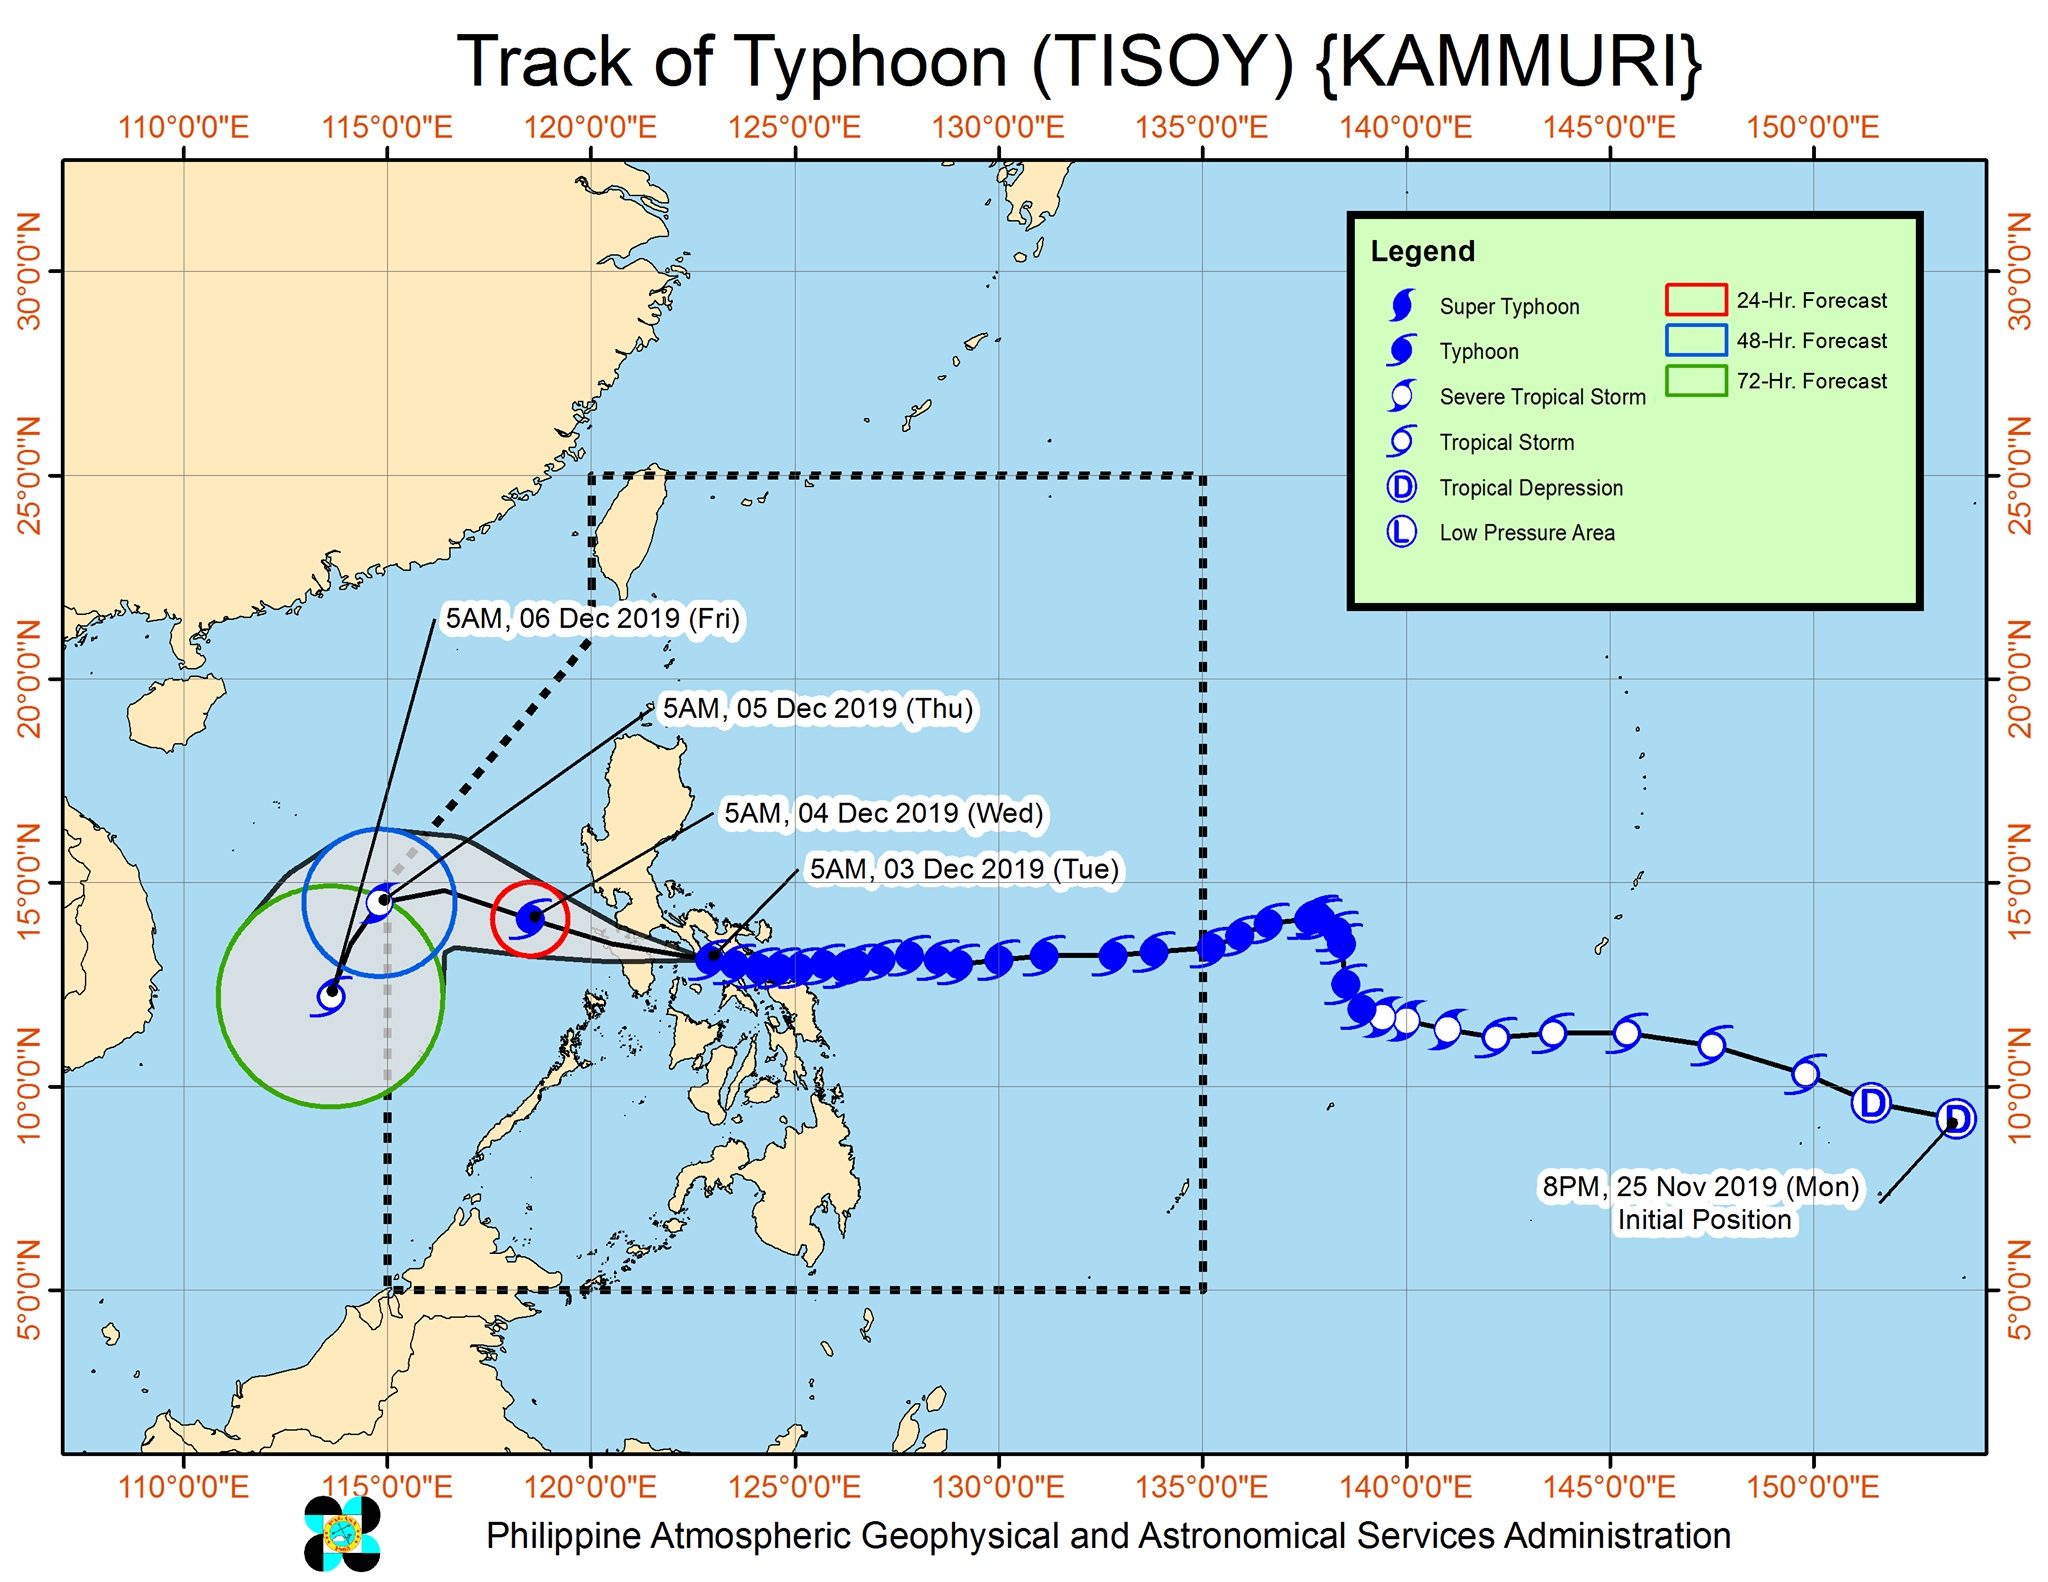 Forecast track of Typhoon Tisoy (Kammuri) as of December 3, 2019, 8 am. Image from PAGASA 